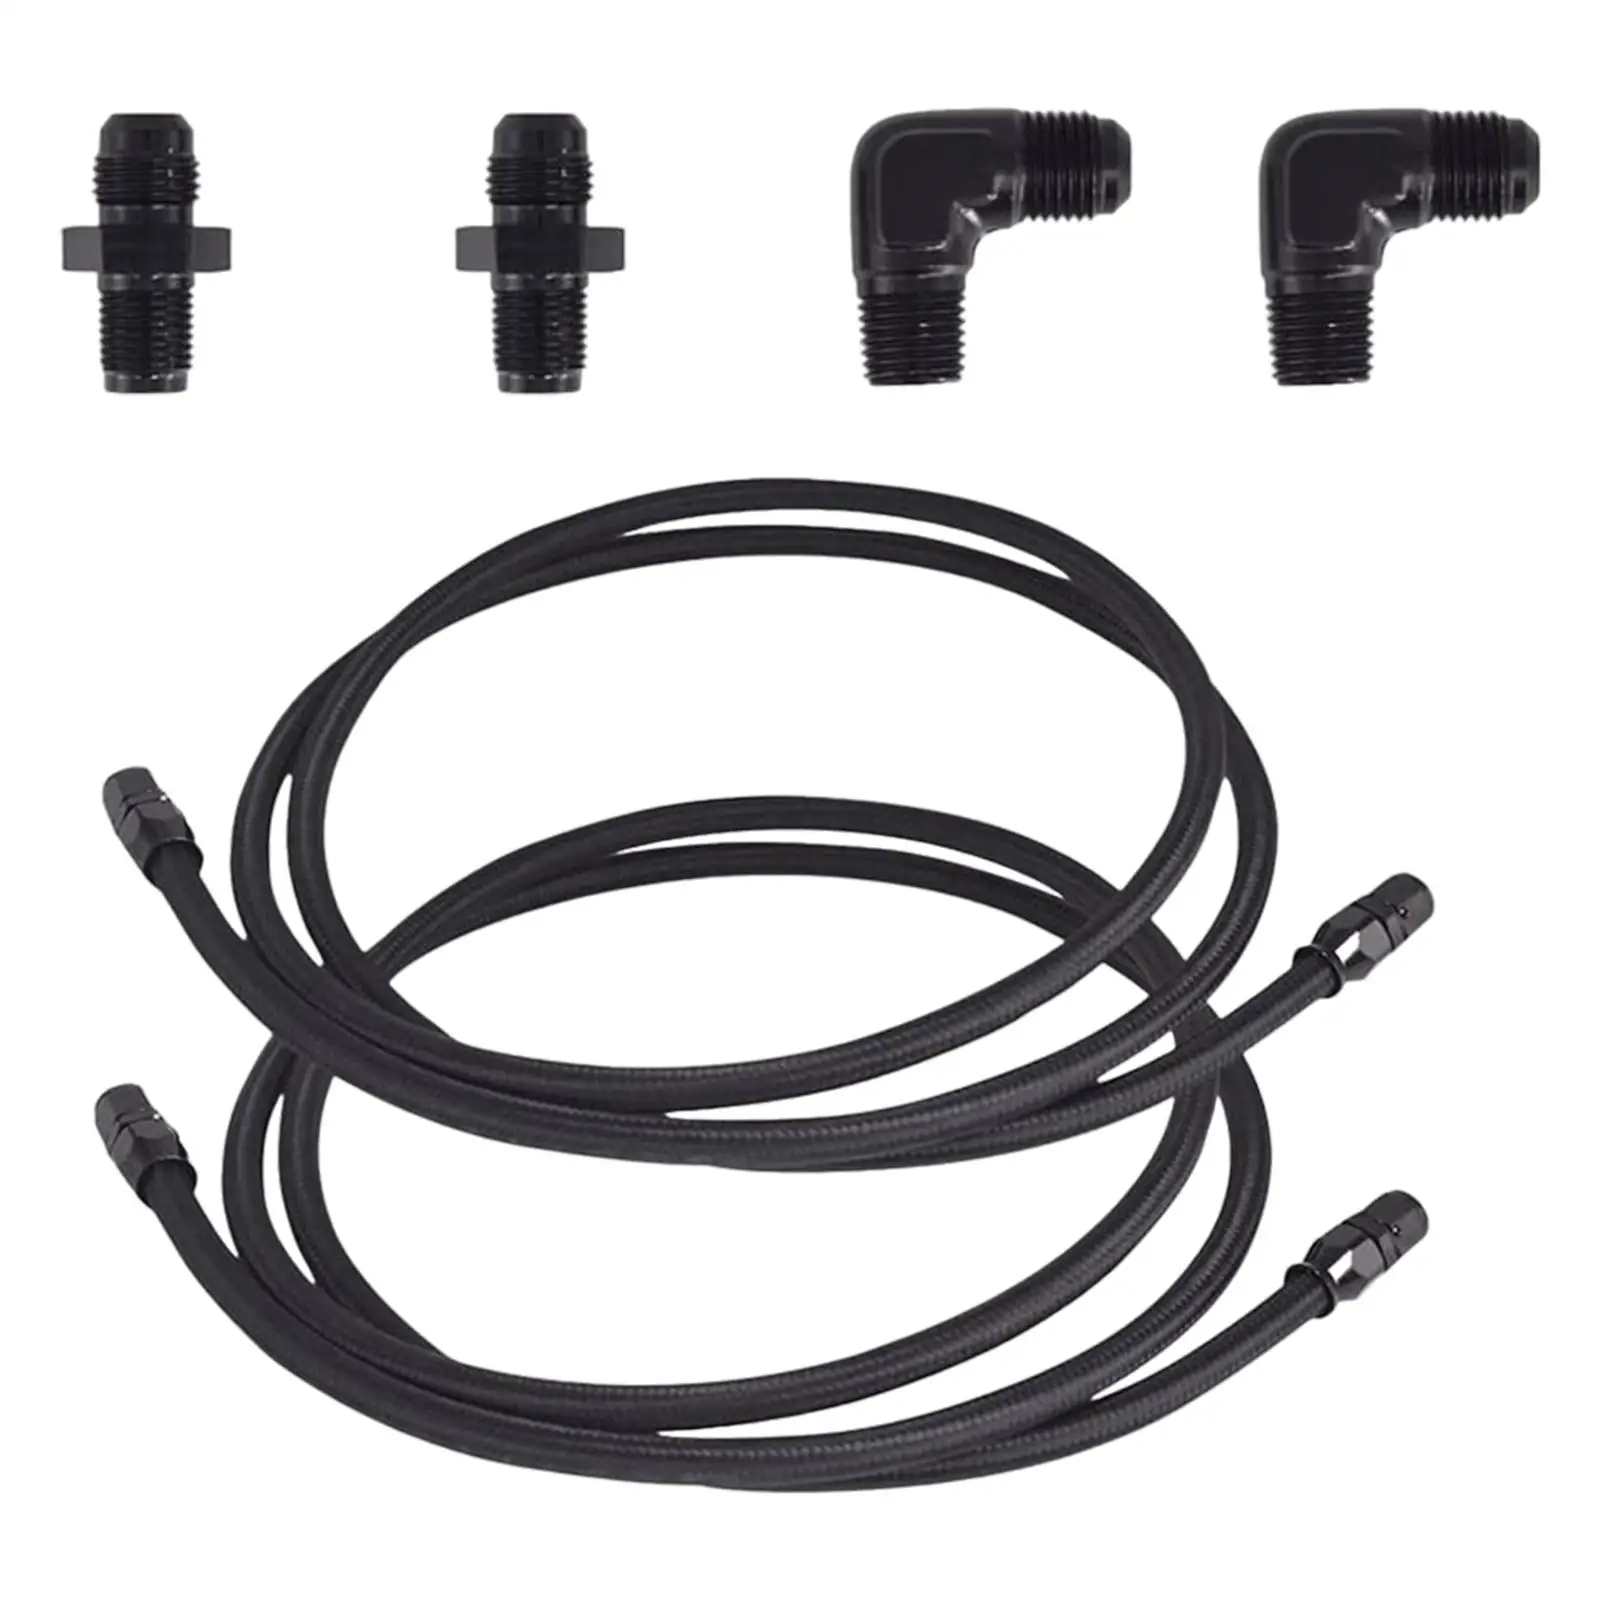 

6AN PTFE Line Fitting Kit High Performance-1/4NPT 90 Degree Accessories